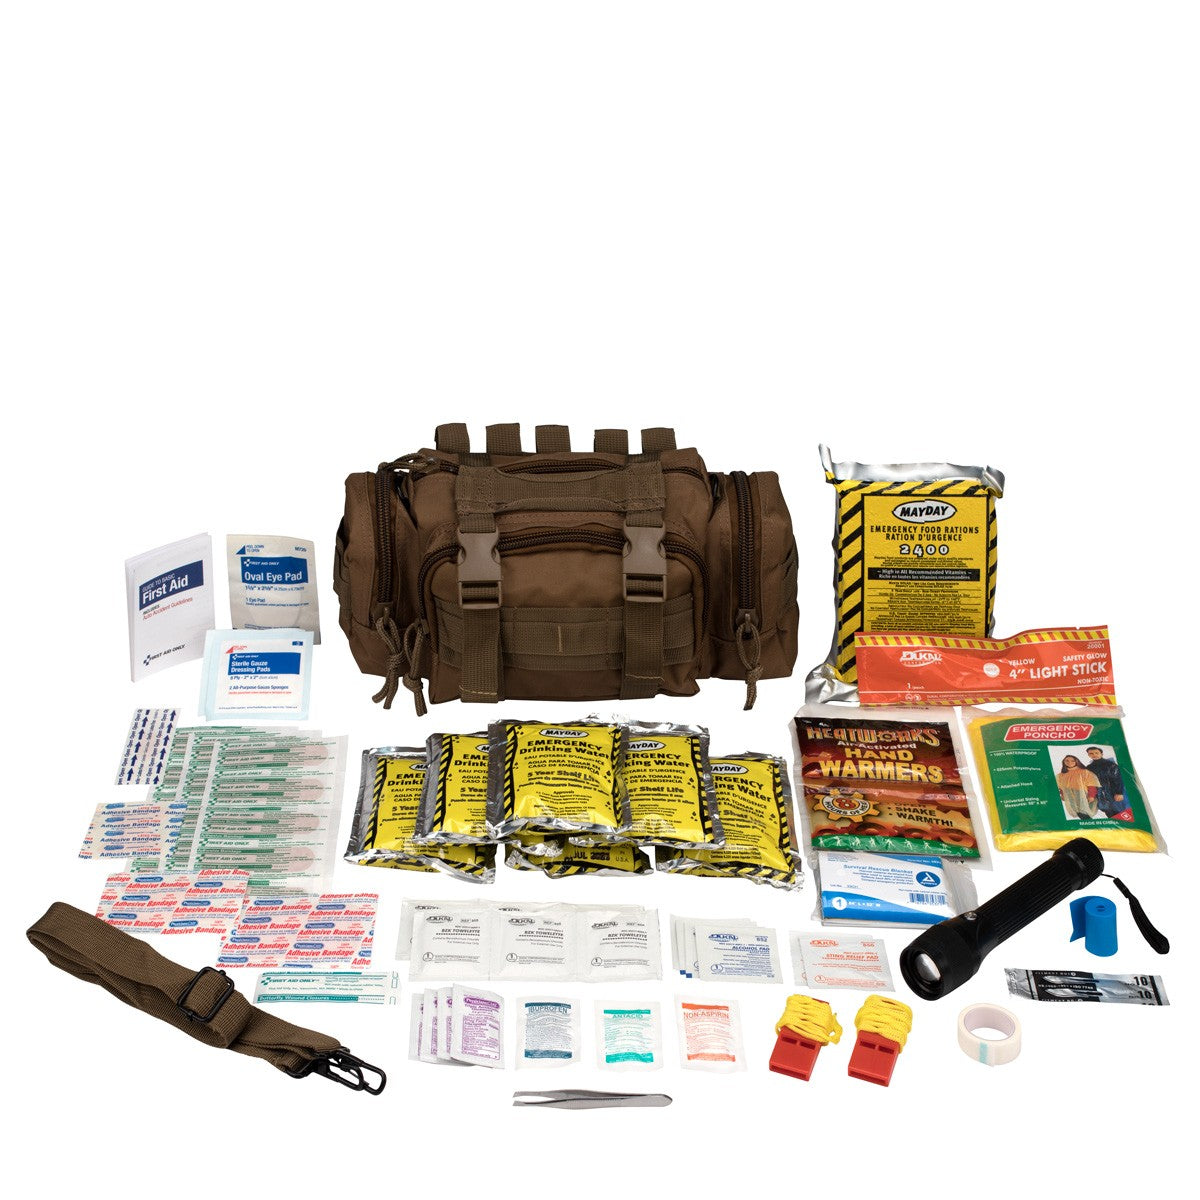 Camillus First Aid 3 Day Survival Kit With Emergency Food And Water, Tan (73 Piece Kit)